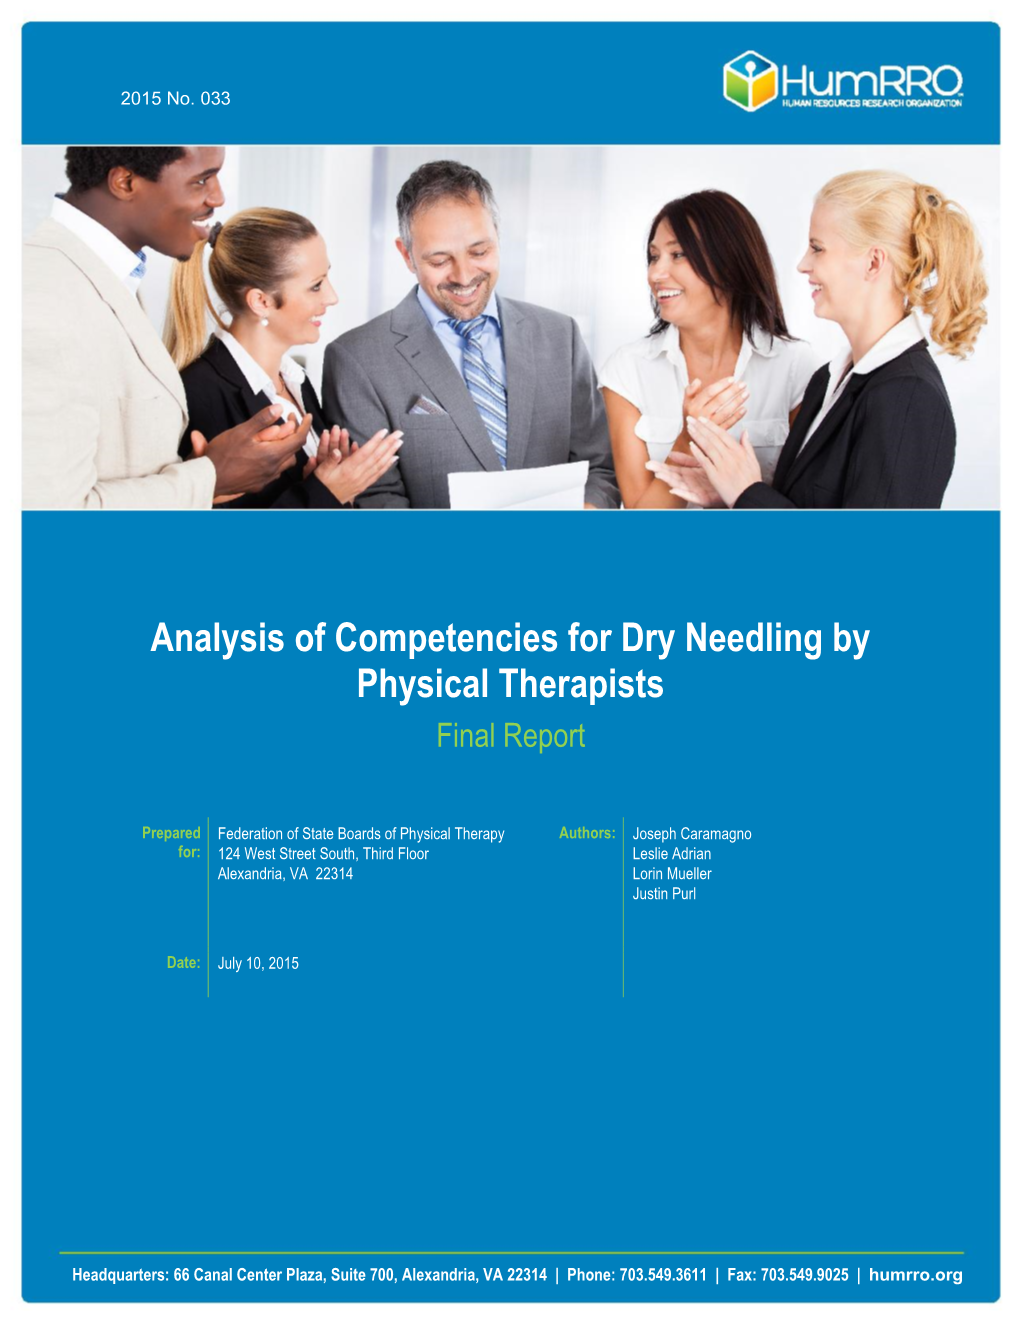 Analysis of Competencies for Dry Needling by Physical Therapists Final Report